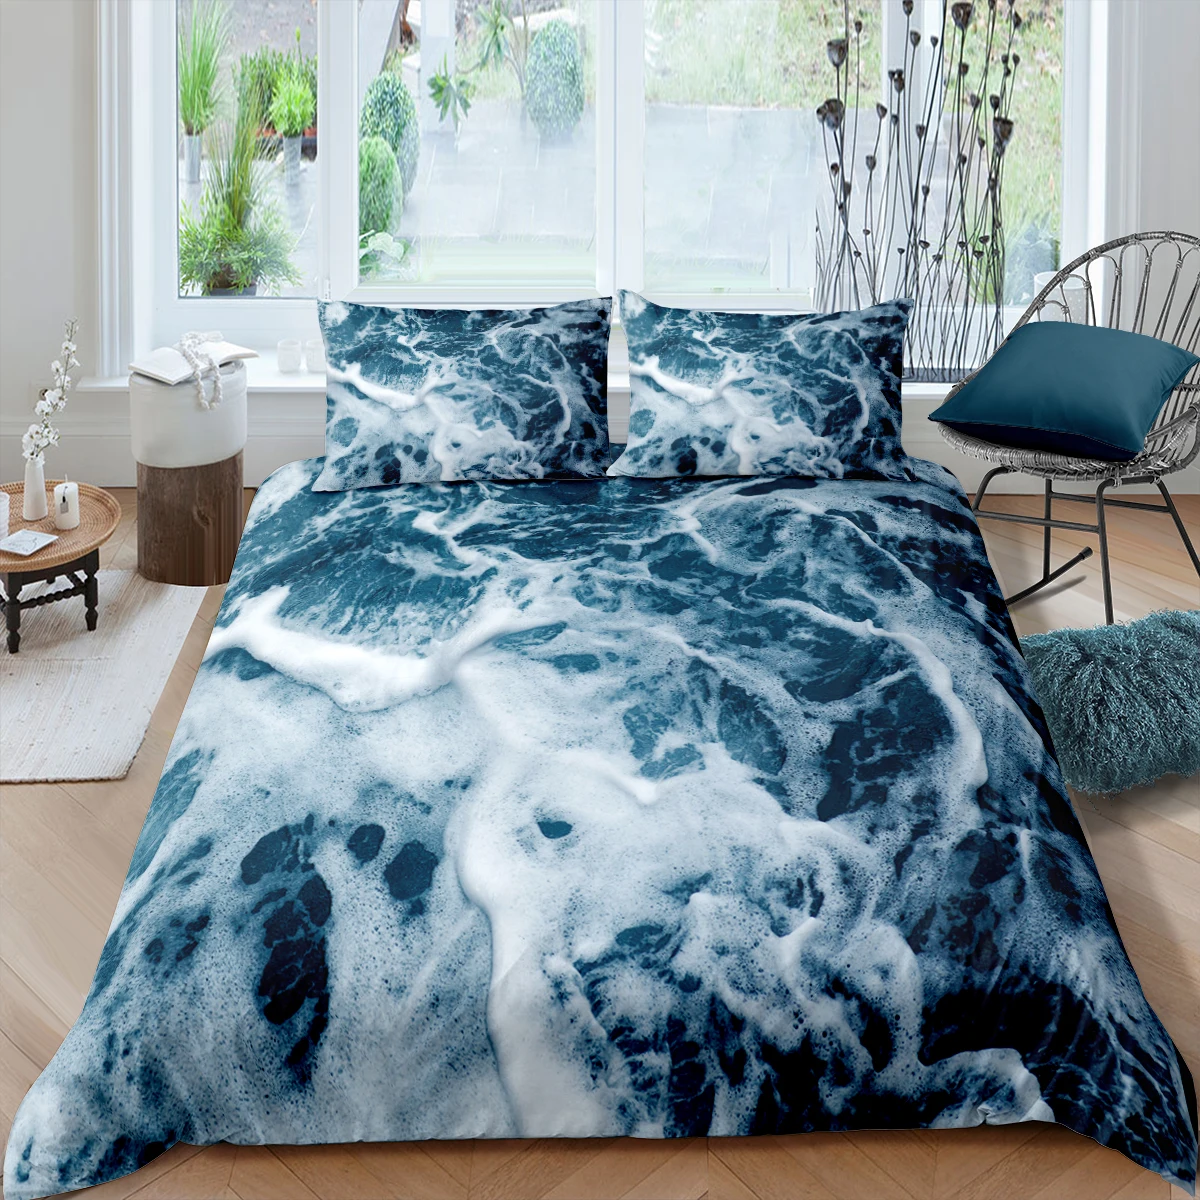 

Home Living Luxury 3D Seawater Bedding Set The Sea Duvet Cover Pillowcase Queen and King EU/US/AU/UK Size Comforter Bedding